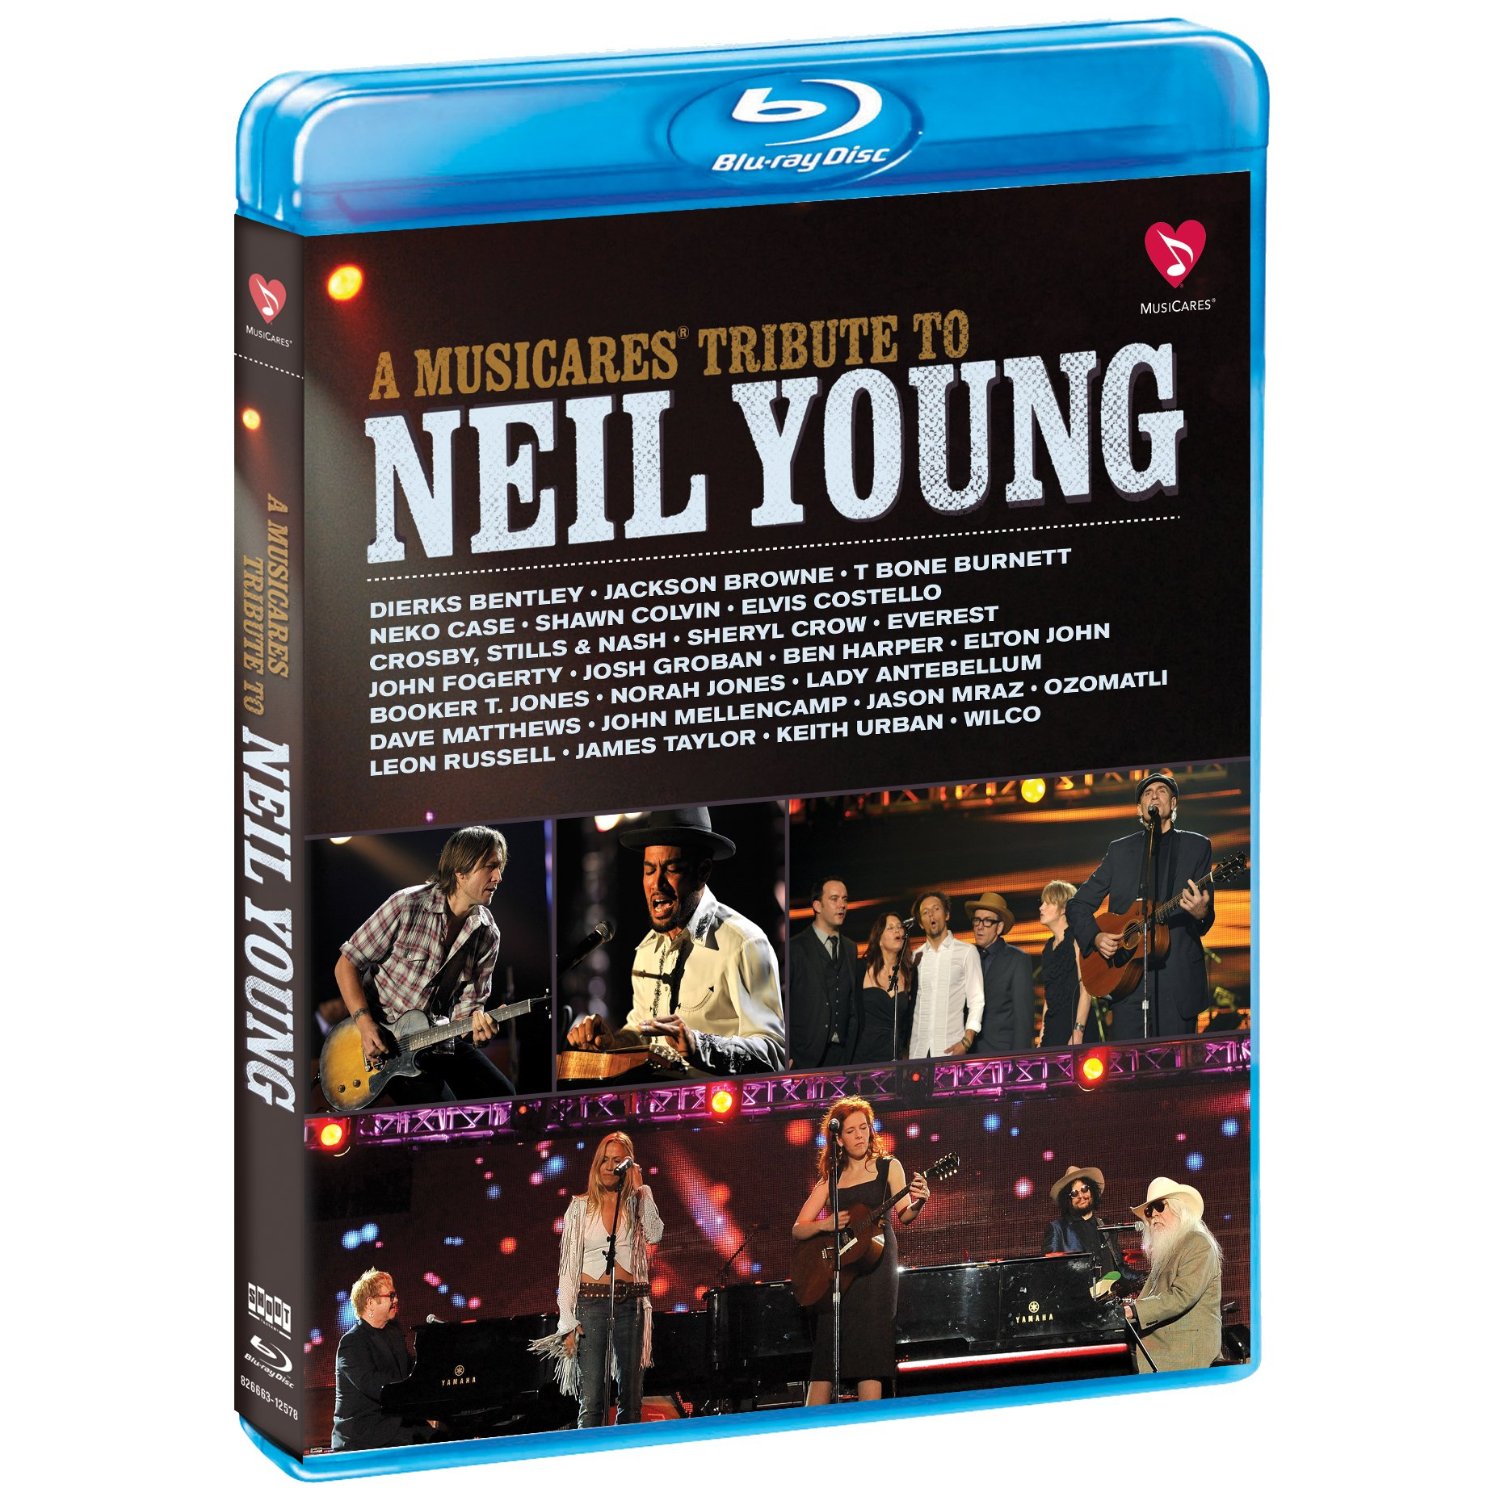 VA - A Musicares Tribute To Neil Young (2011) BDRip 1080.x264.DTS-HD MA